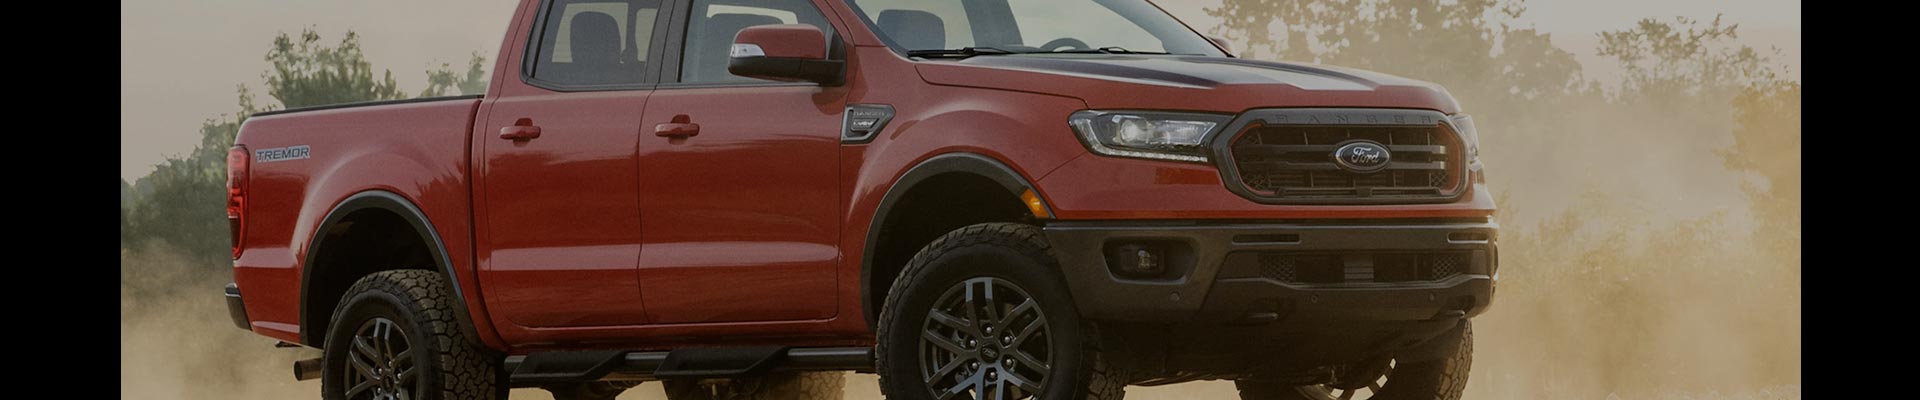 Shop Replacement and OEM 2009 Ford Ranger Parts with Discounted Price on the Net